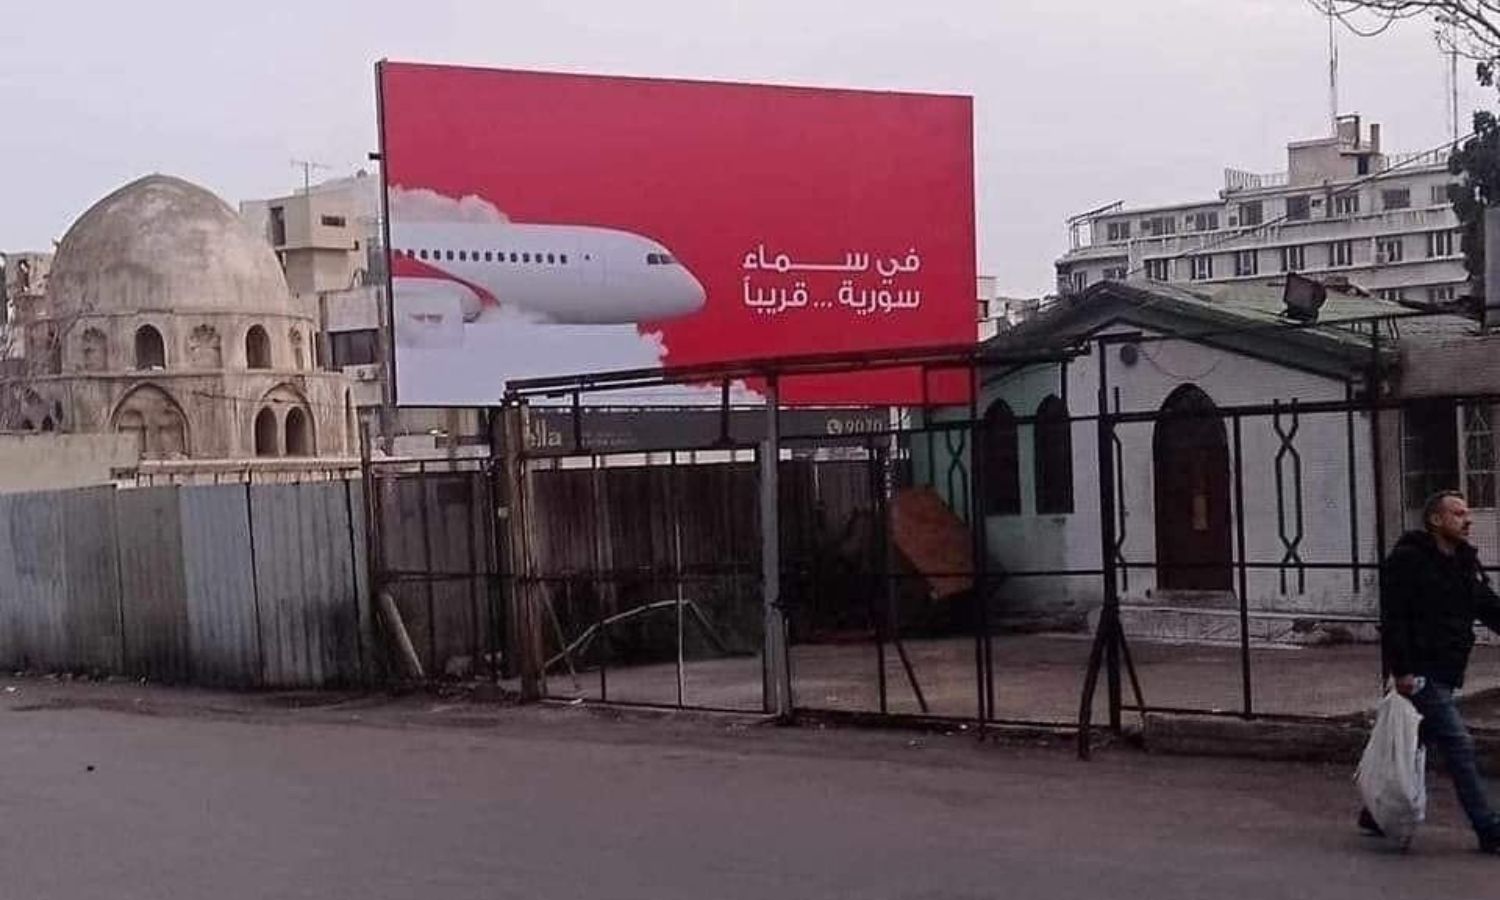 A new airline has been licensed to operate in Syria next year - December 12, 2023 (Lattakia News/Facebook)